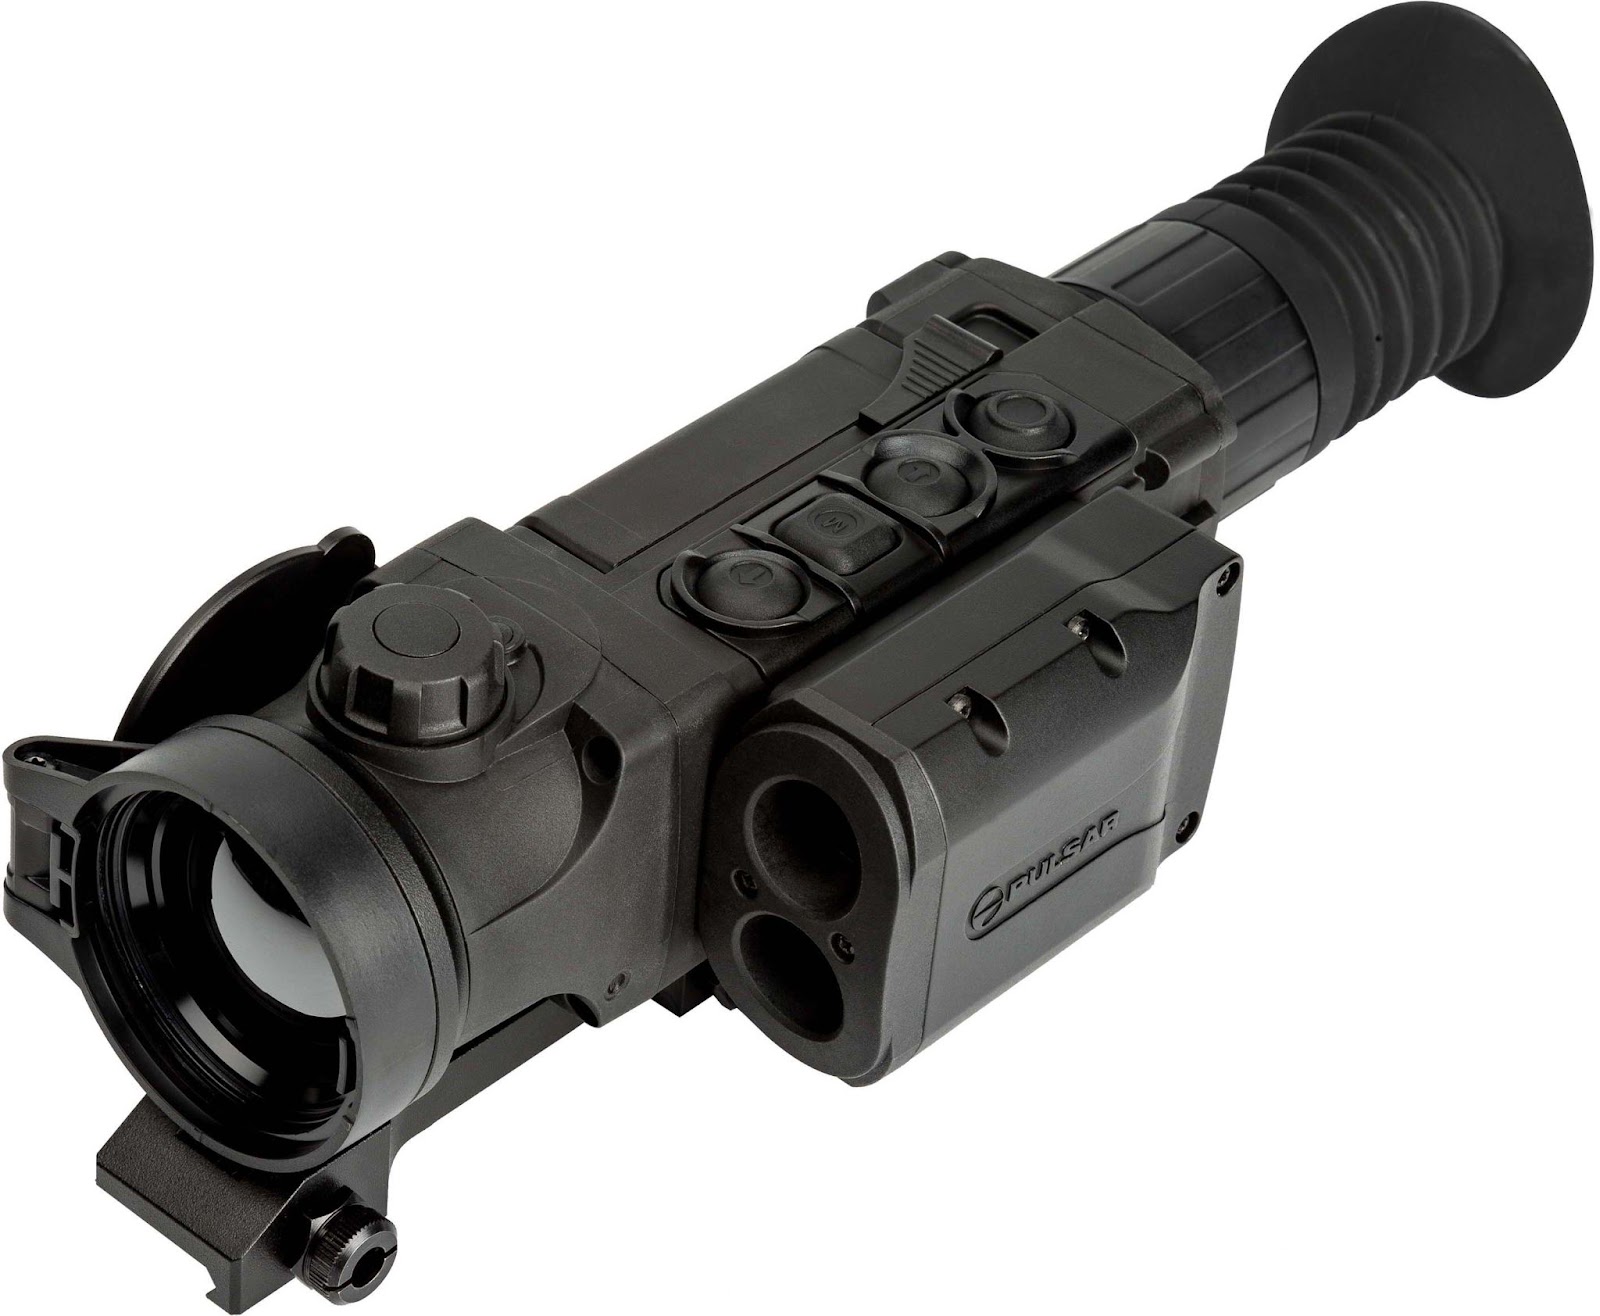 The best thermal scope for hog hunting is the Pulsar Trail 2 LRF XP50